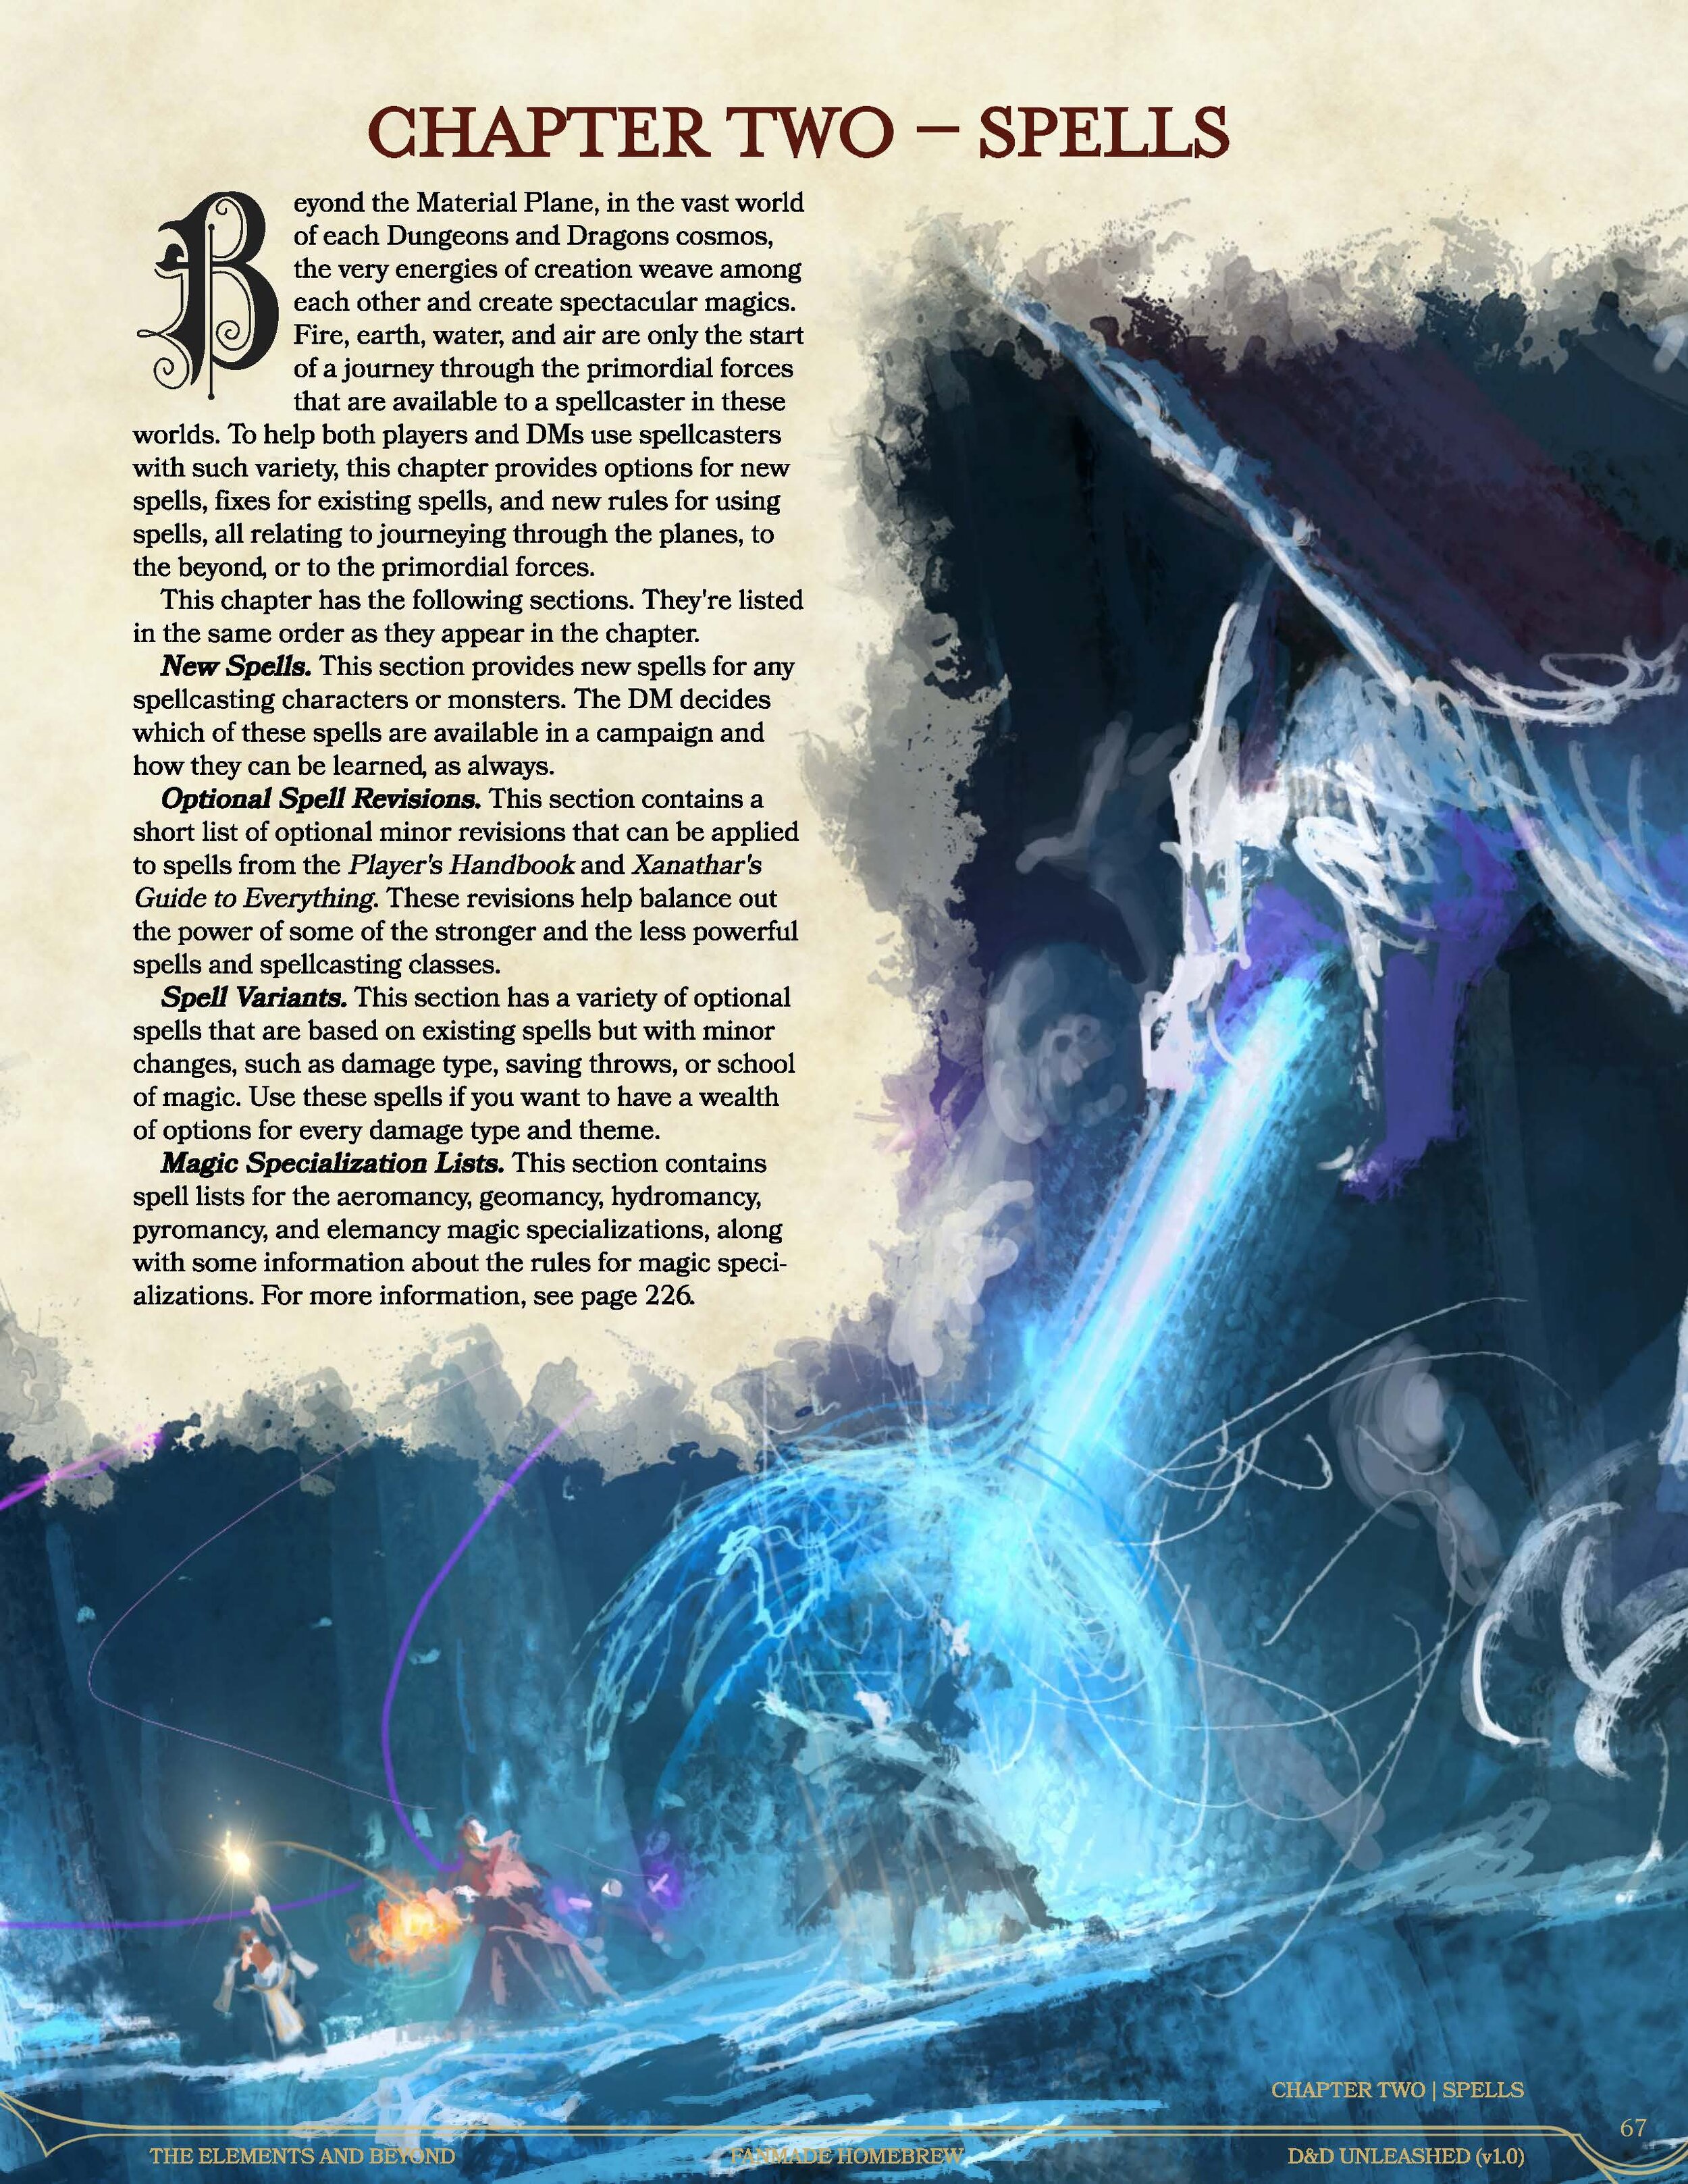 D&D Unleashed Compendium -- The Elements and Beyond (v1p0)_Page_067.jpg